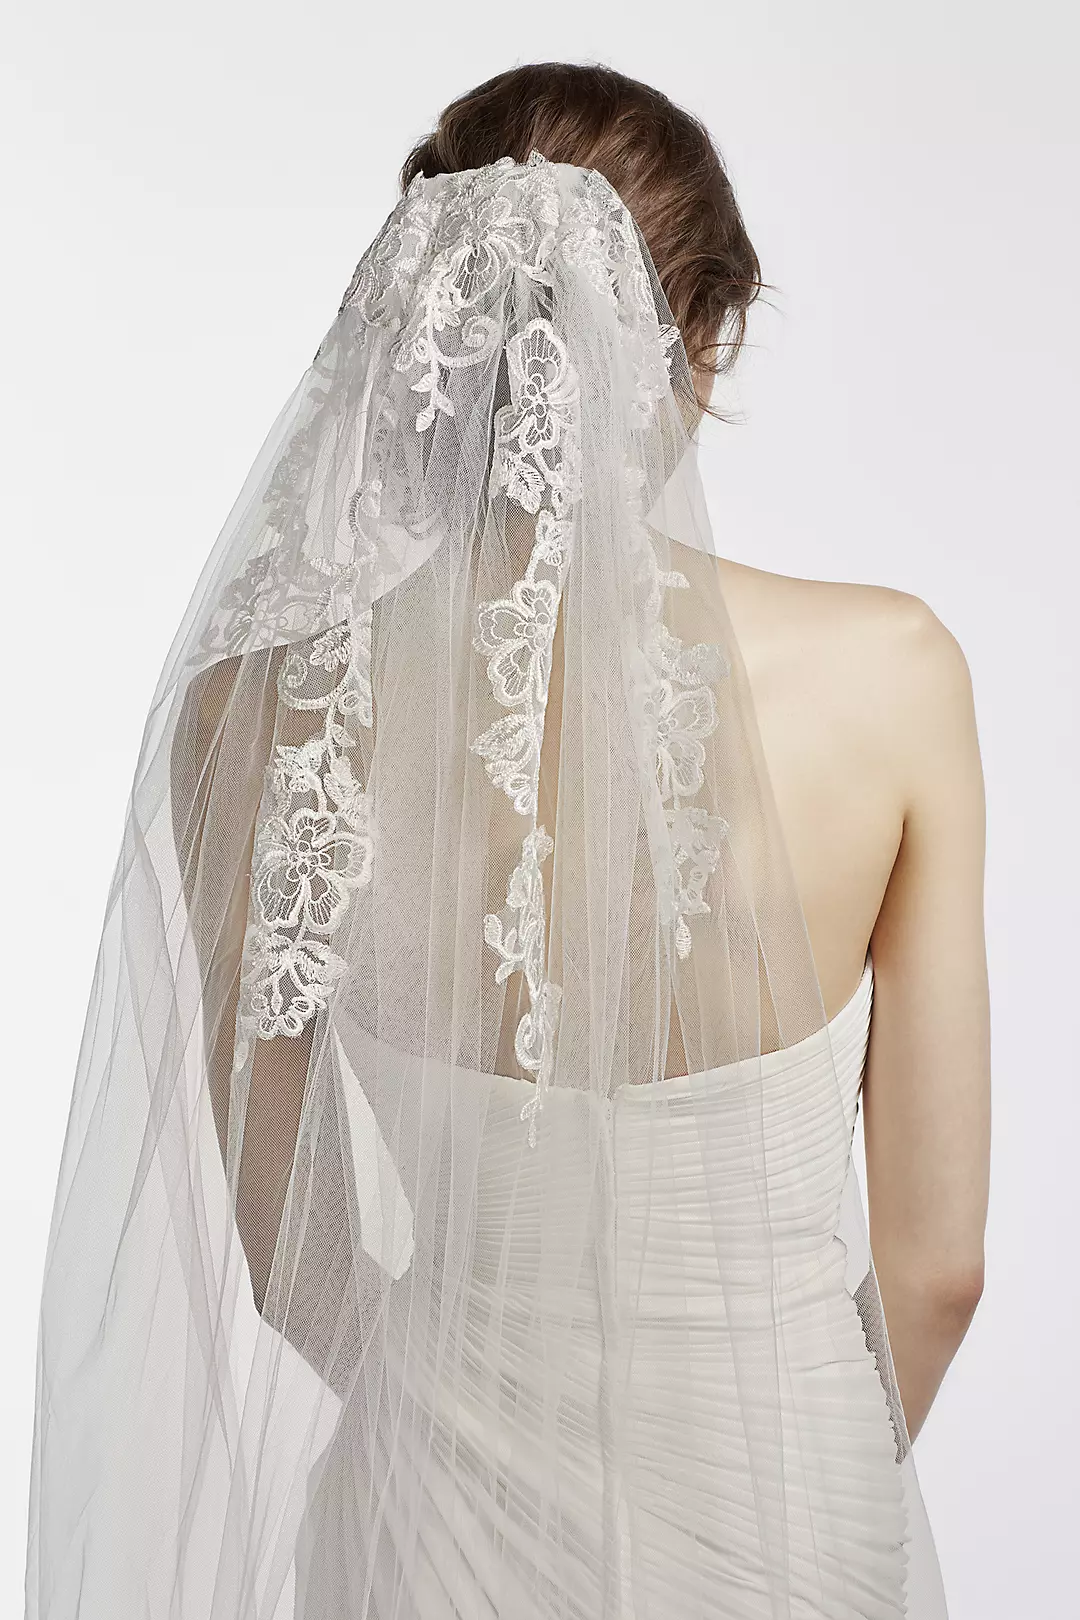 One Tier Floral Embroidered Veil Image 2